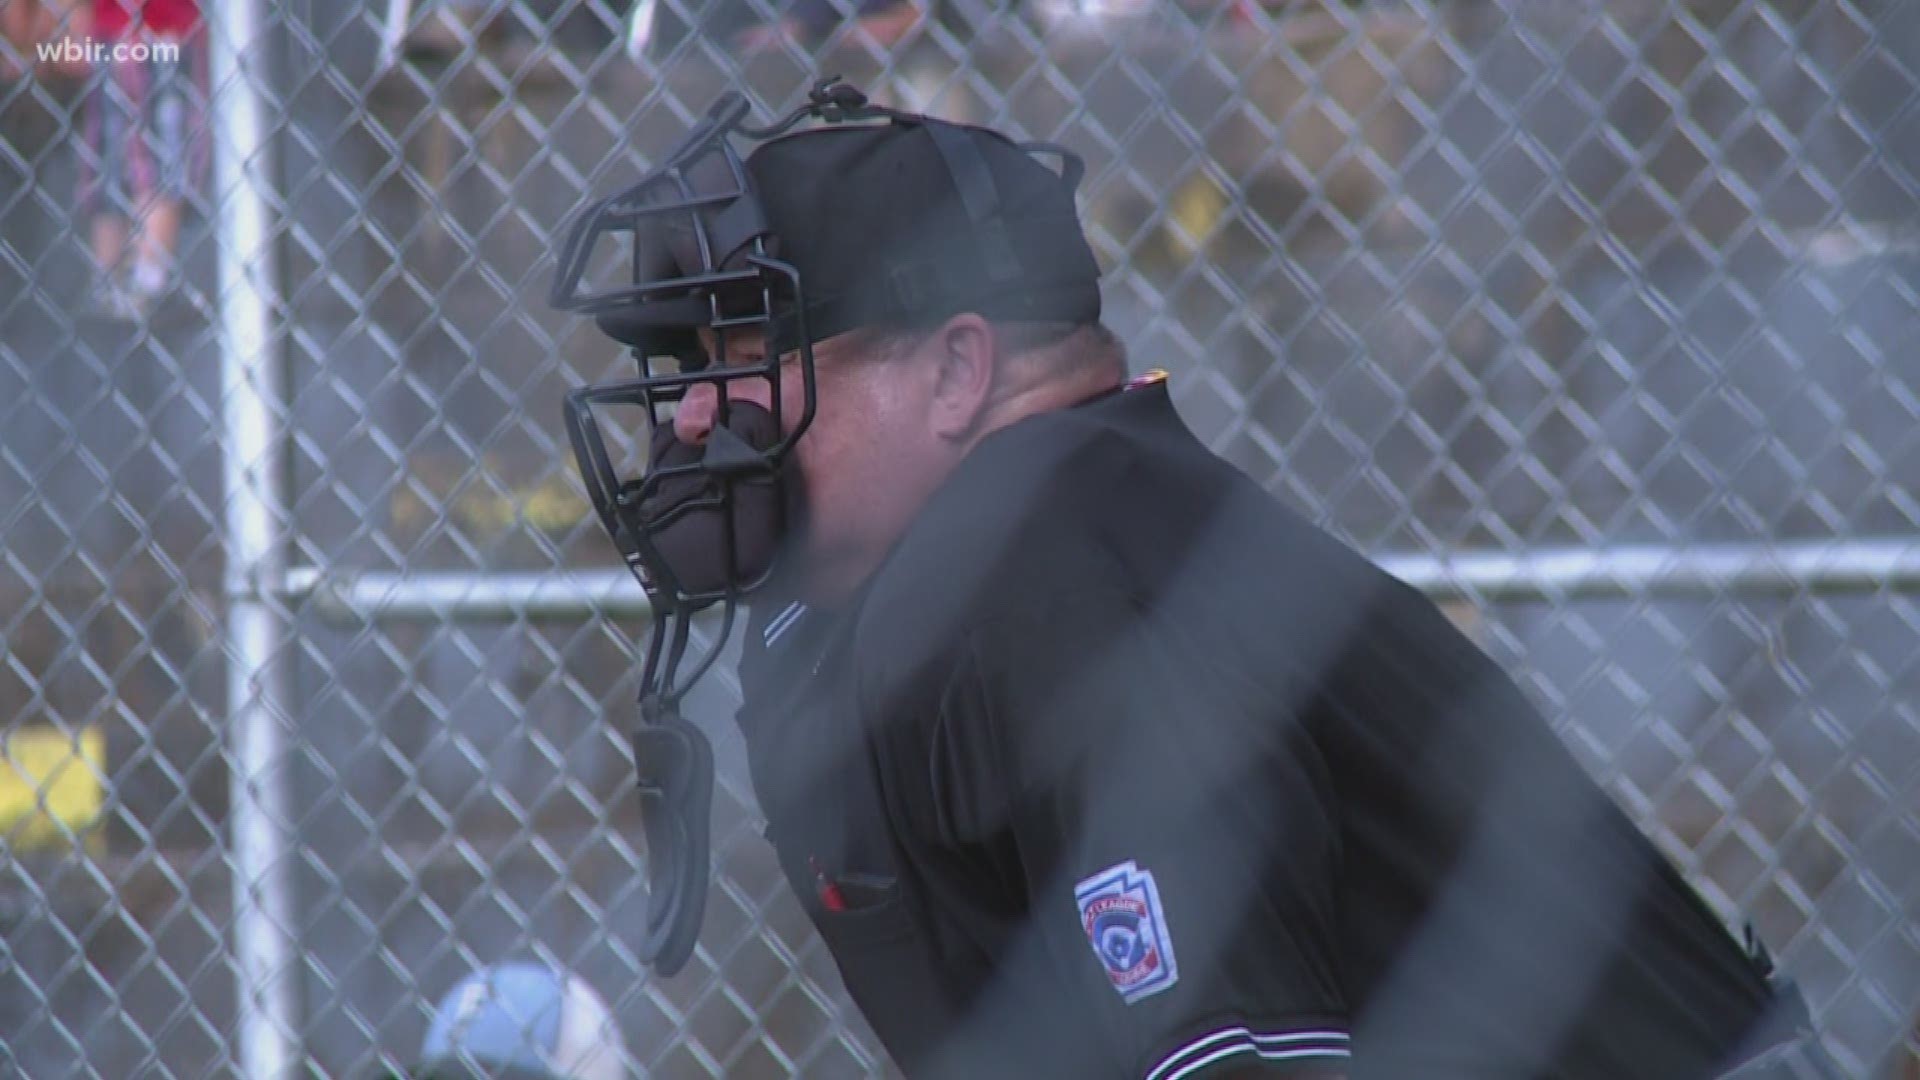 Marty Henry volunteers as an umpire at West Knox County Little League in Karns. For ten years, he's been working towards Williamsport and not even cancer could get in the way of his goal.